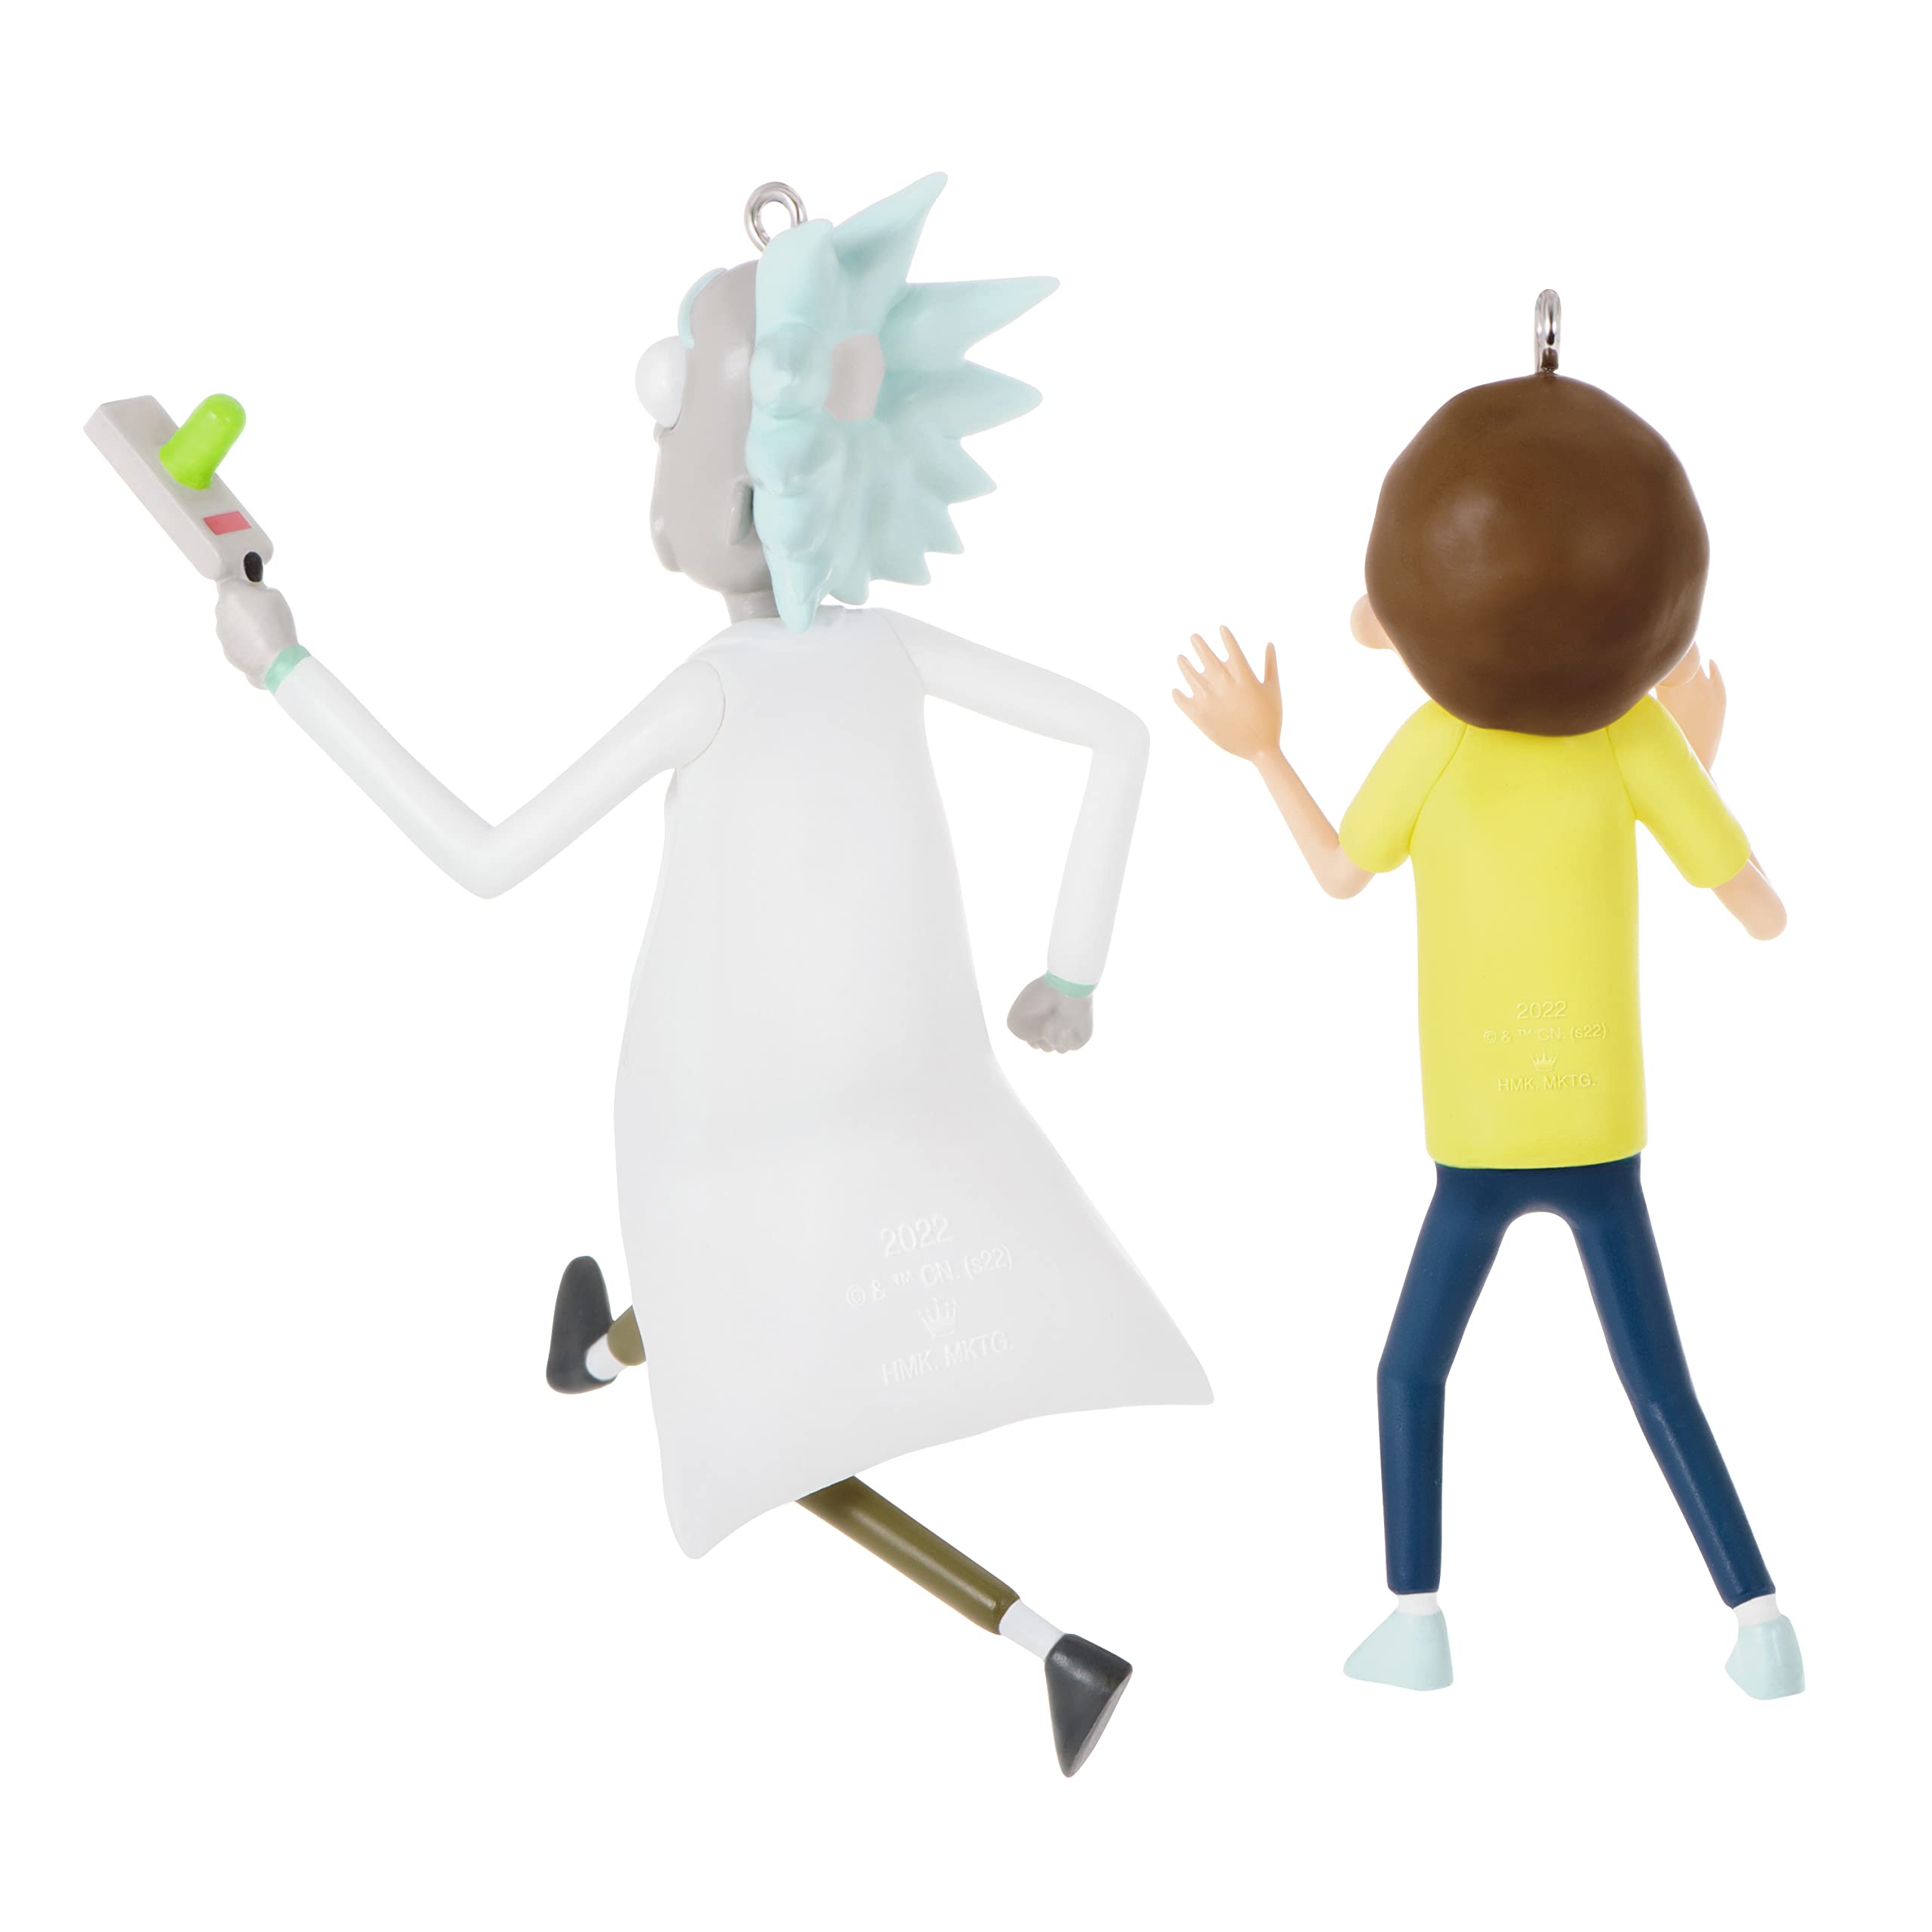 This Just Don't Think About It, Morty! set of 2 Hallmark Keepsake Christmas Ornament